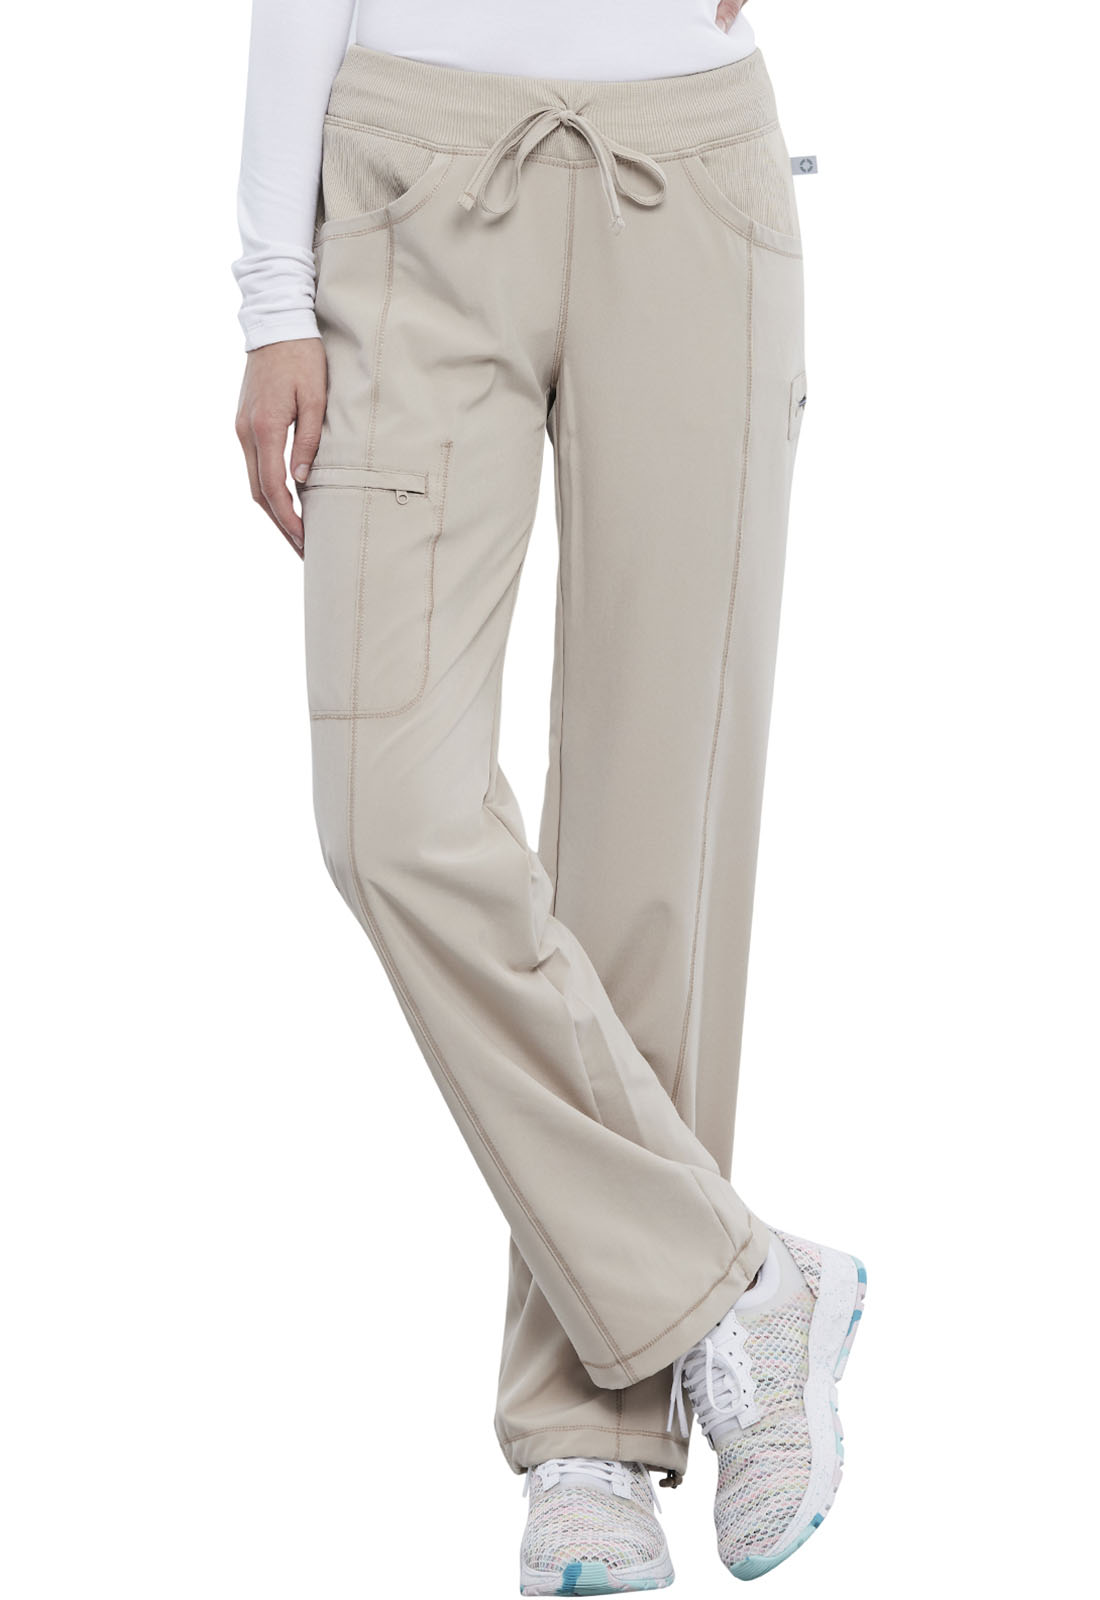 Infinity by Cherokee Low Rise Straight Leg Drawstring Pant - Plus Size -  1123A - Best Value Medical